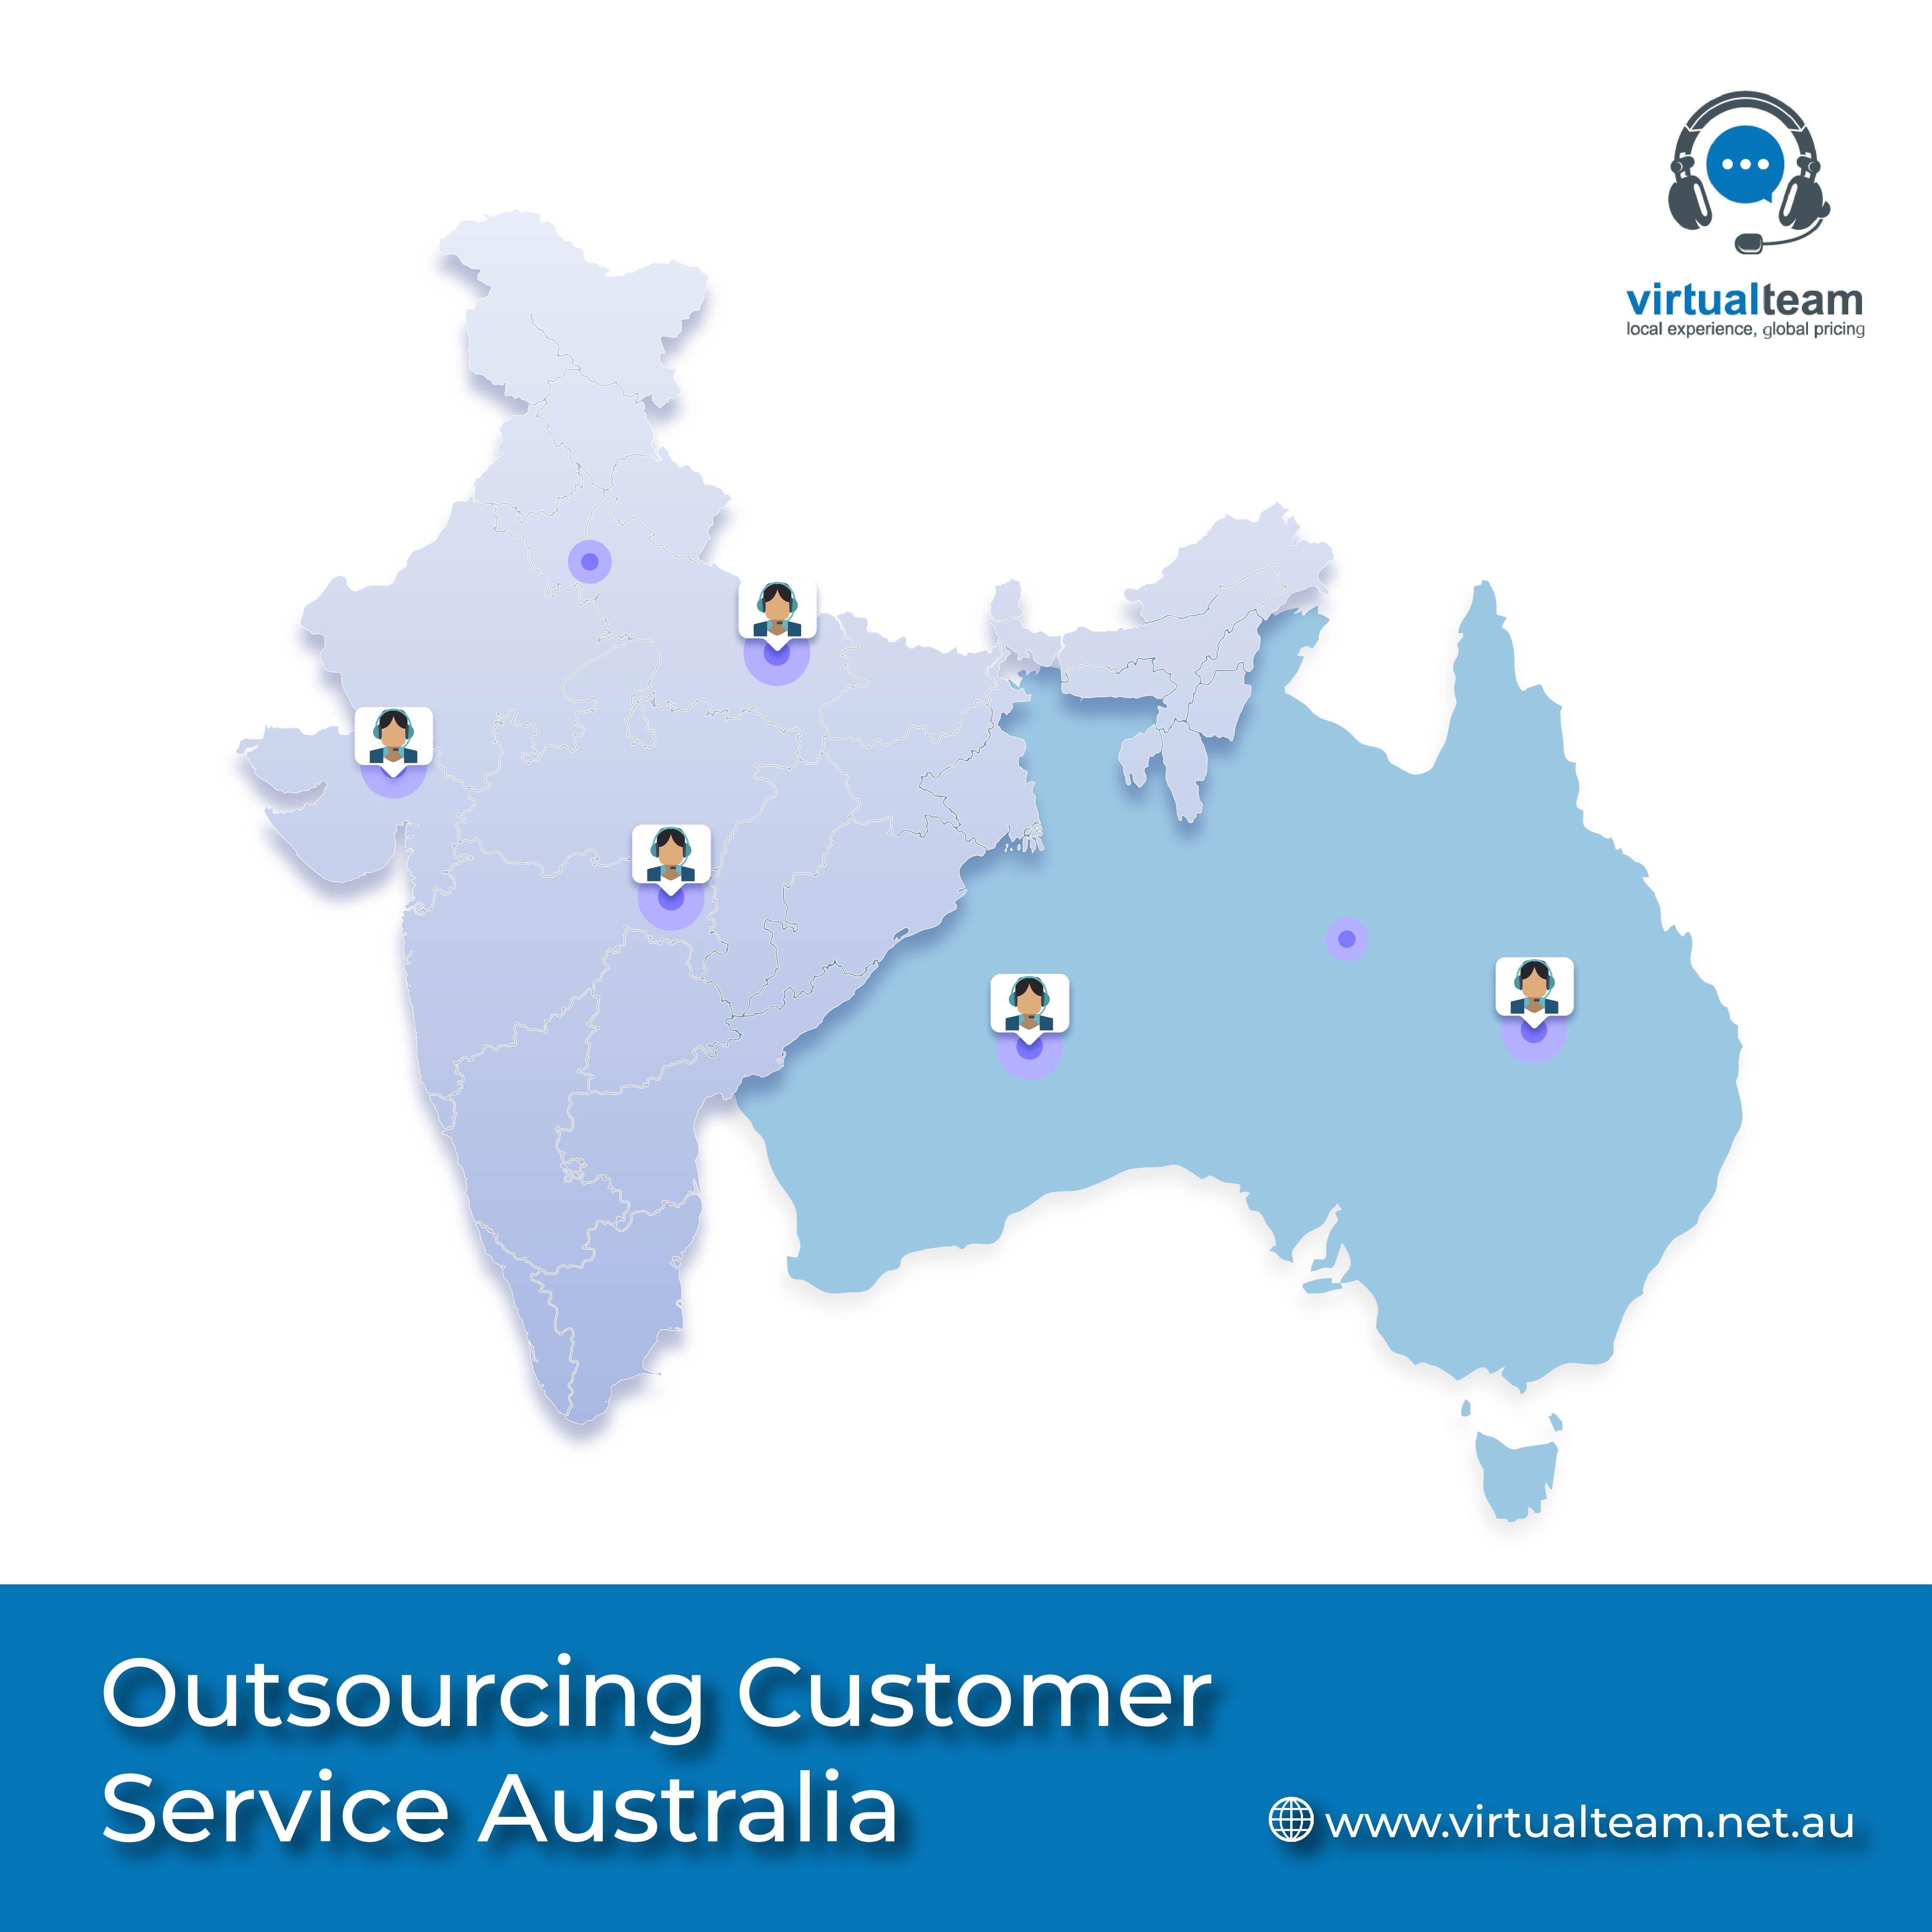 Why are Australian Companies Outsourcing Customer Support to India? - JustPaste.it